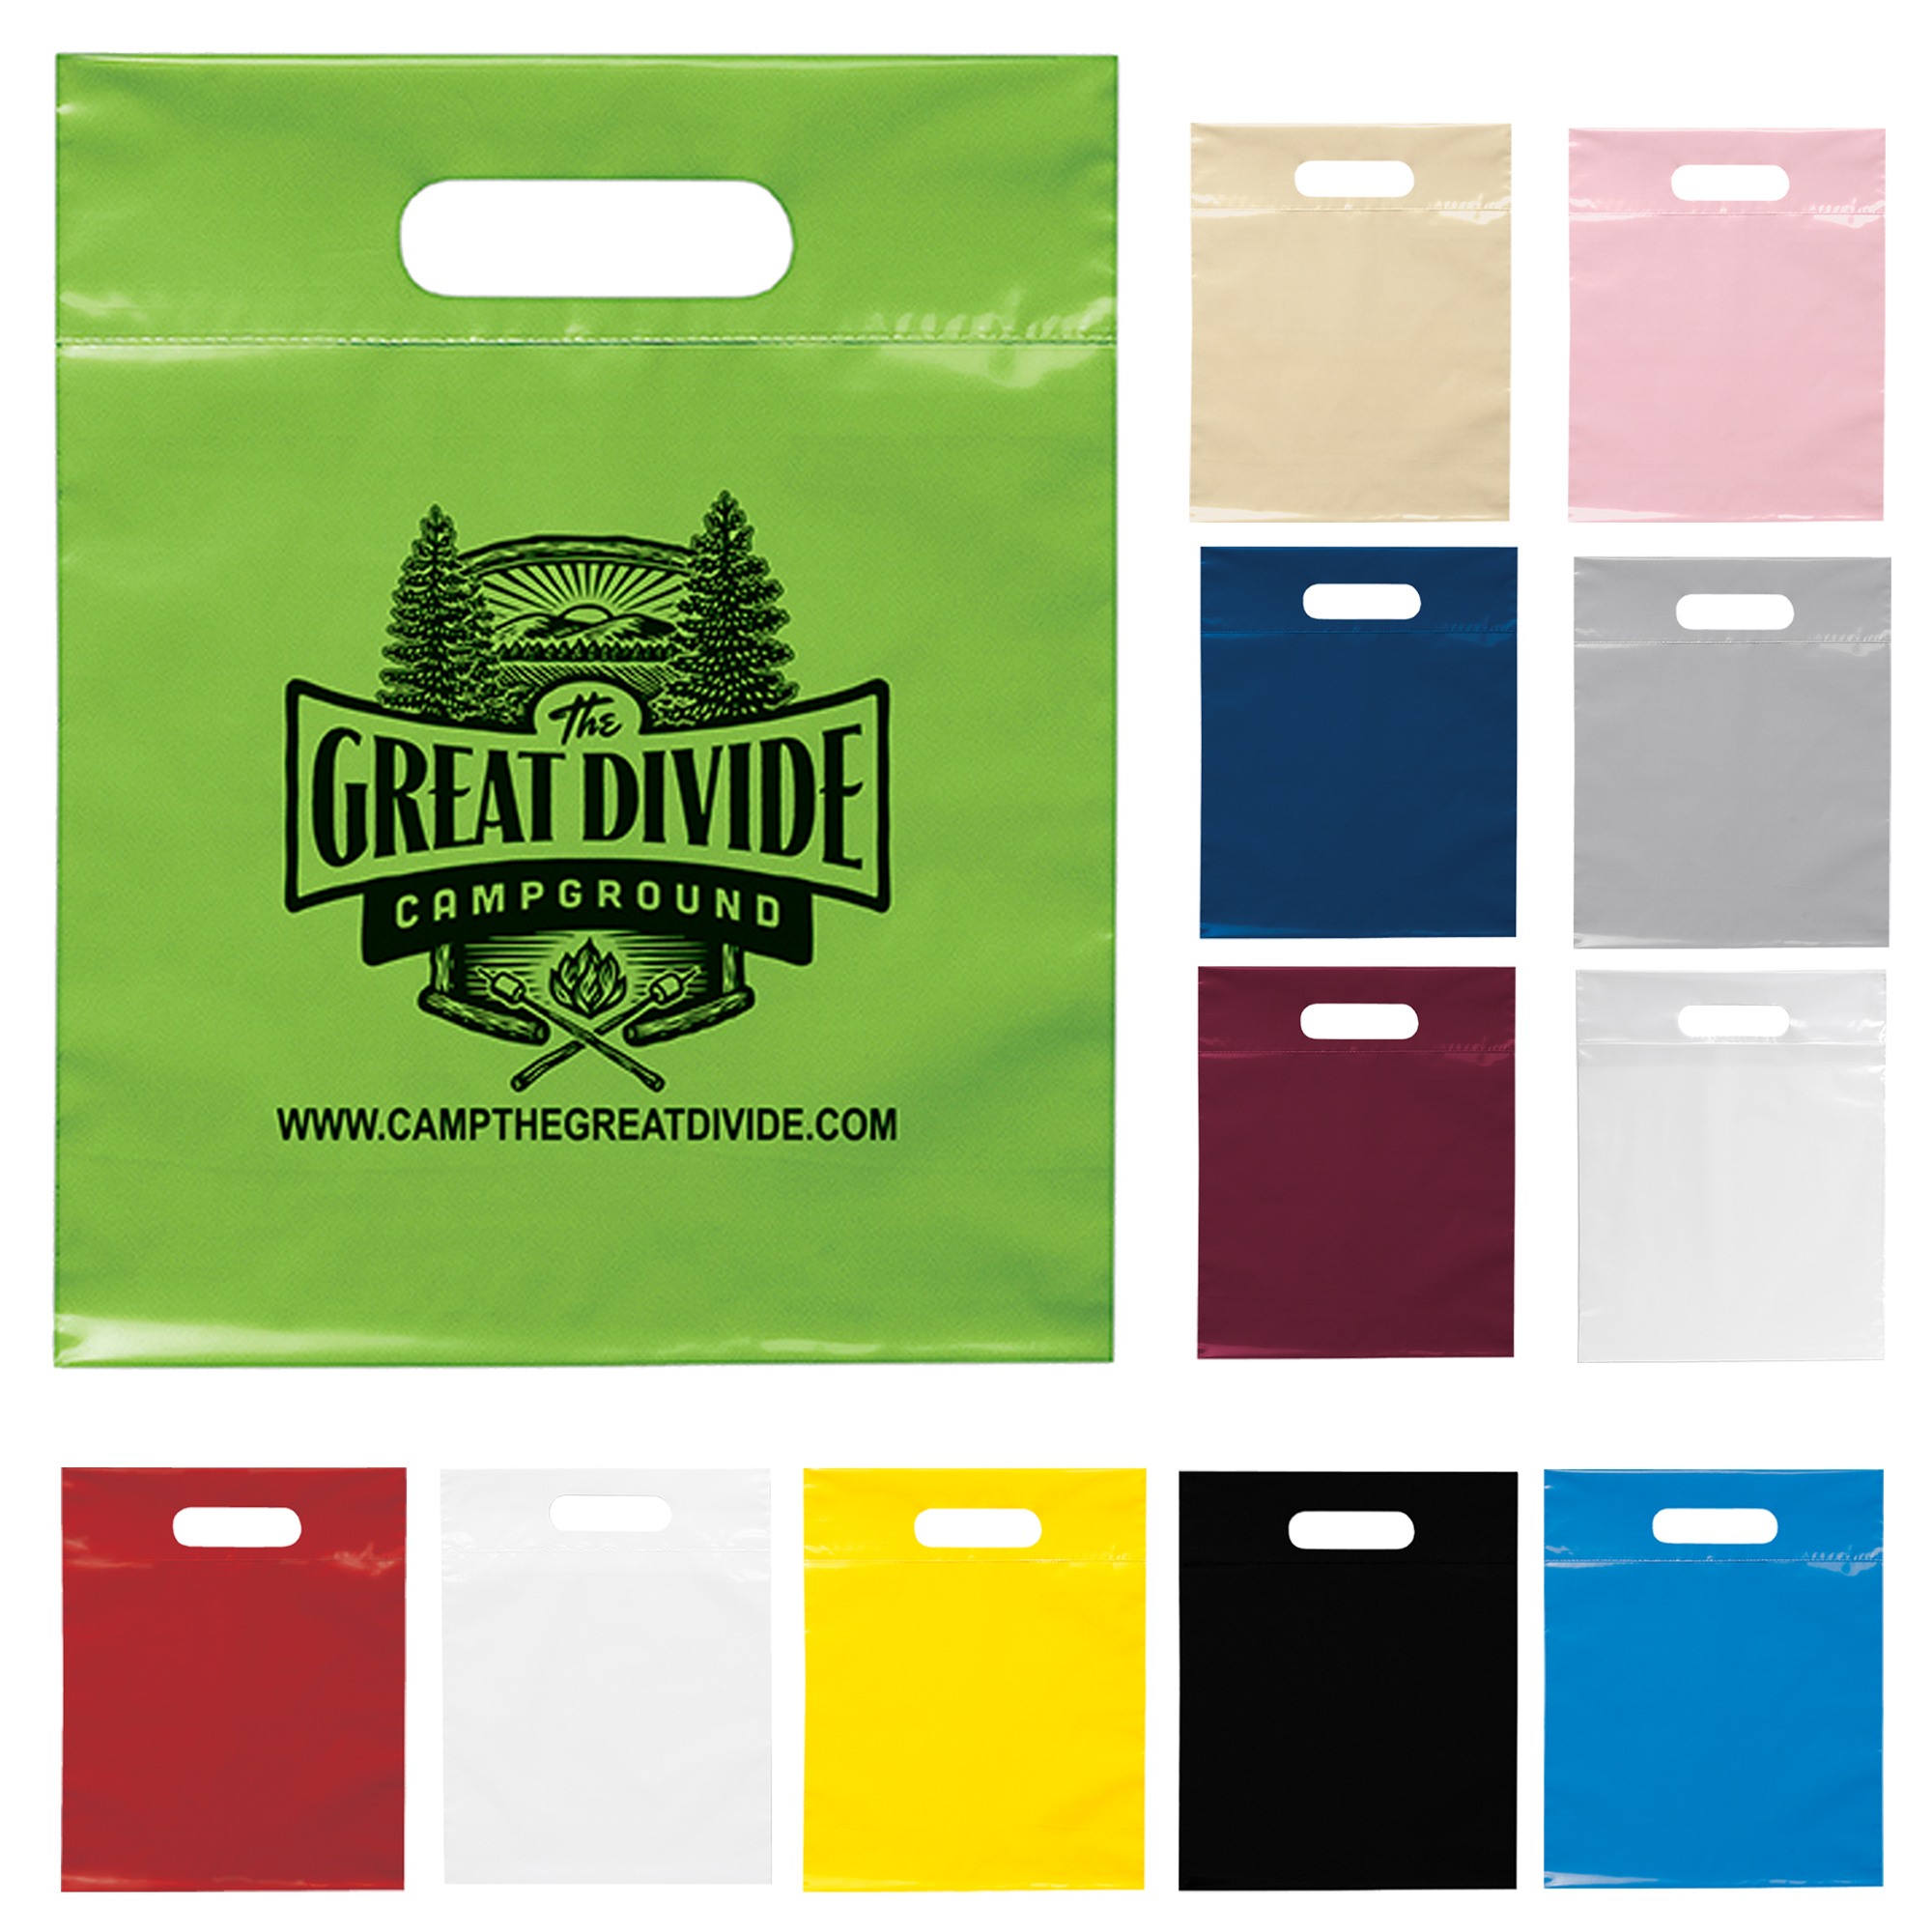 Custom Printed Plastic Bags for Promotions, Packaging and Shipping Supplies